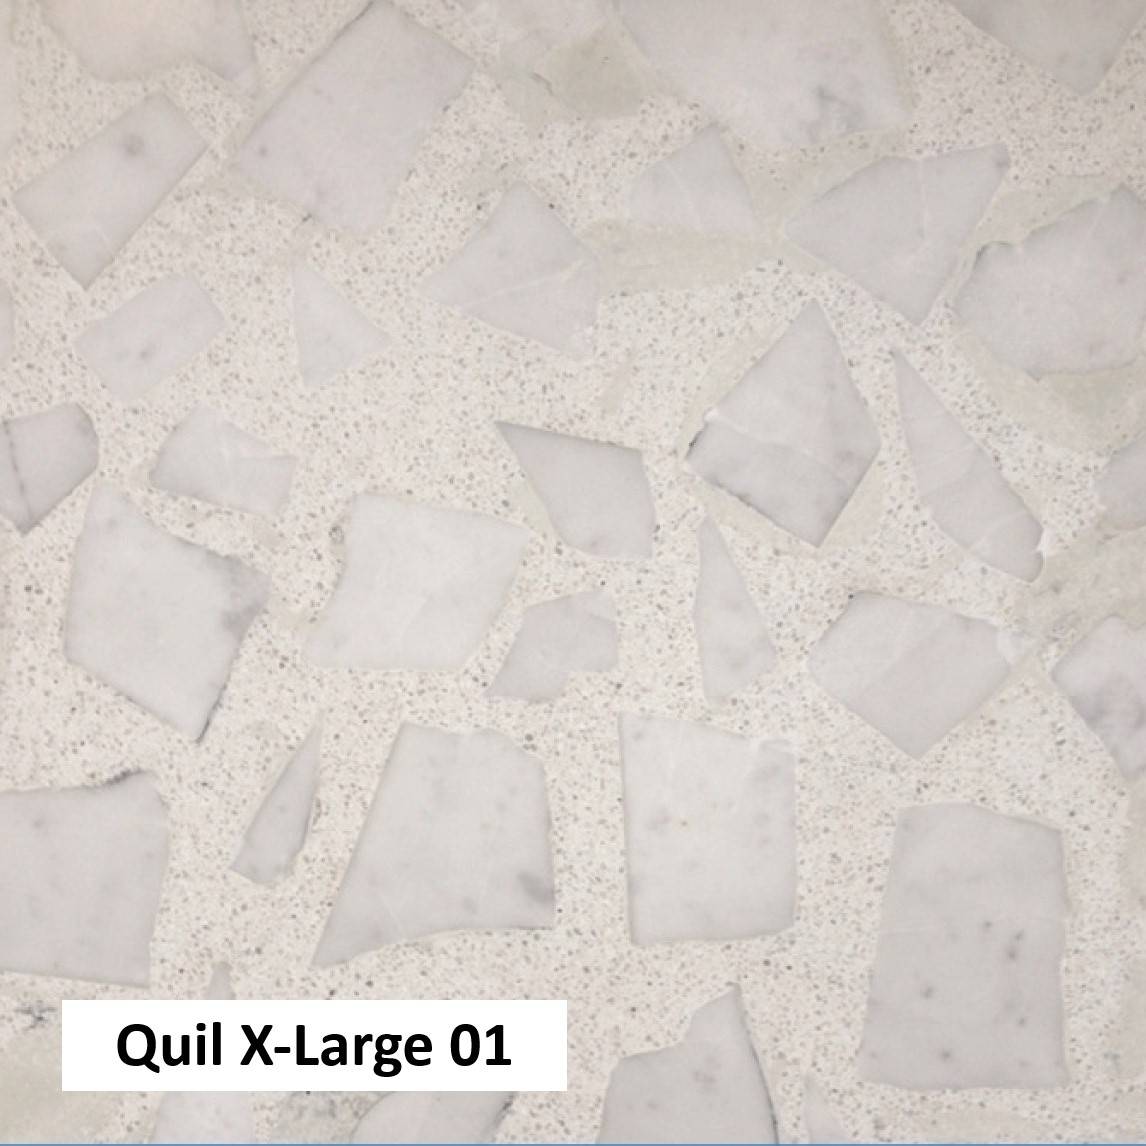 Terrazzo Quil-X Large - Tile